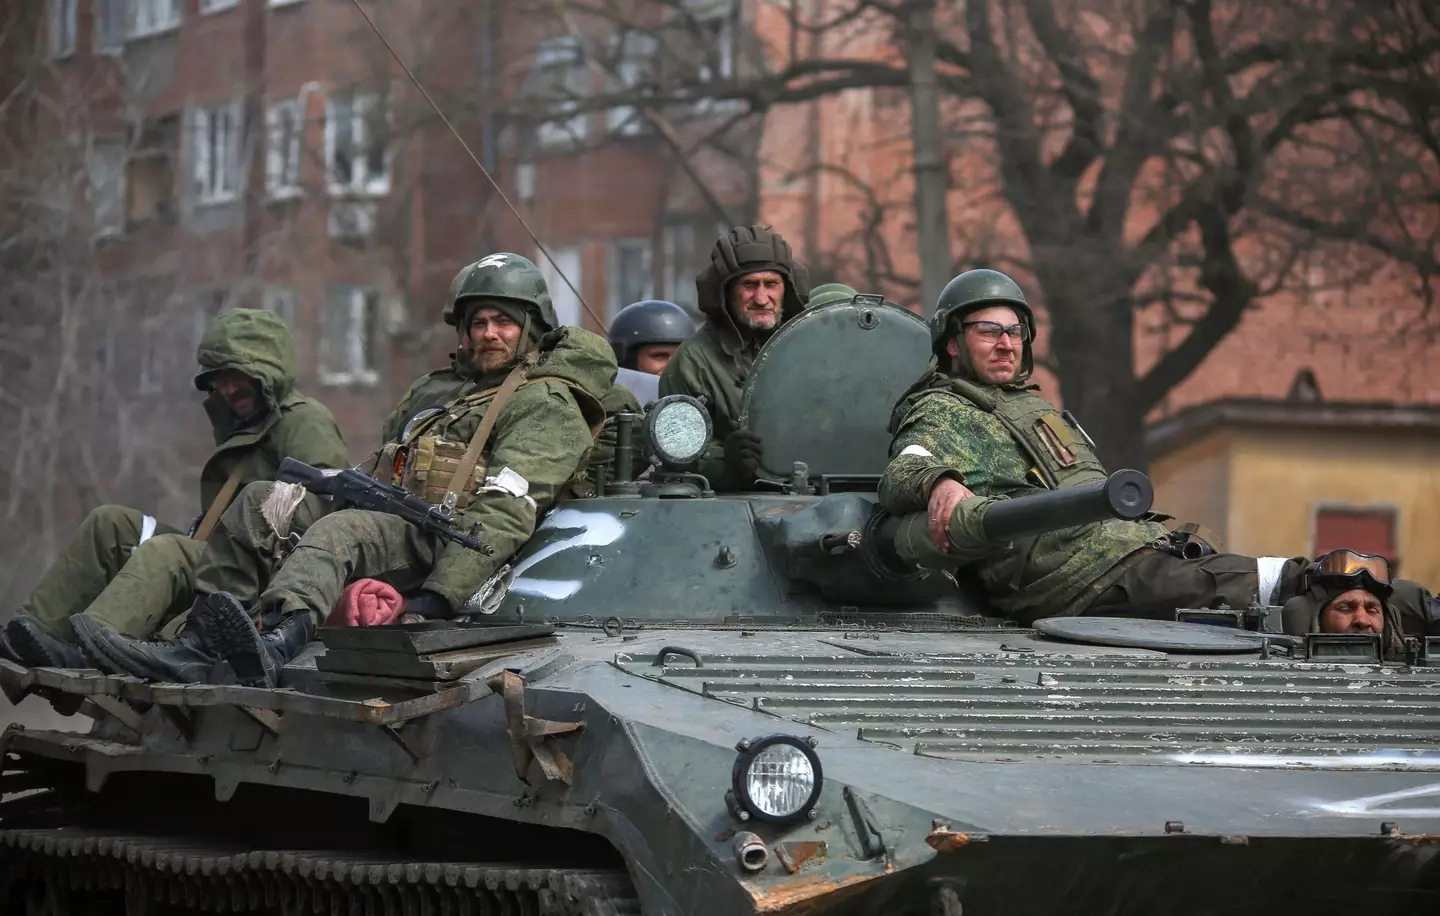 It is believed some Russian soldiers have been destroying their own vehicles to get out of fighting.